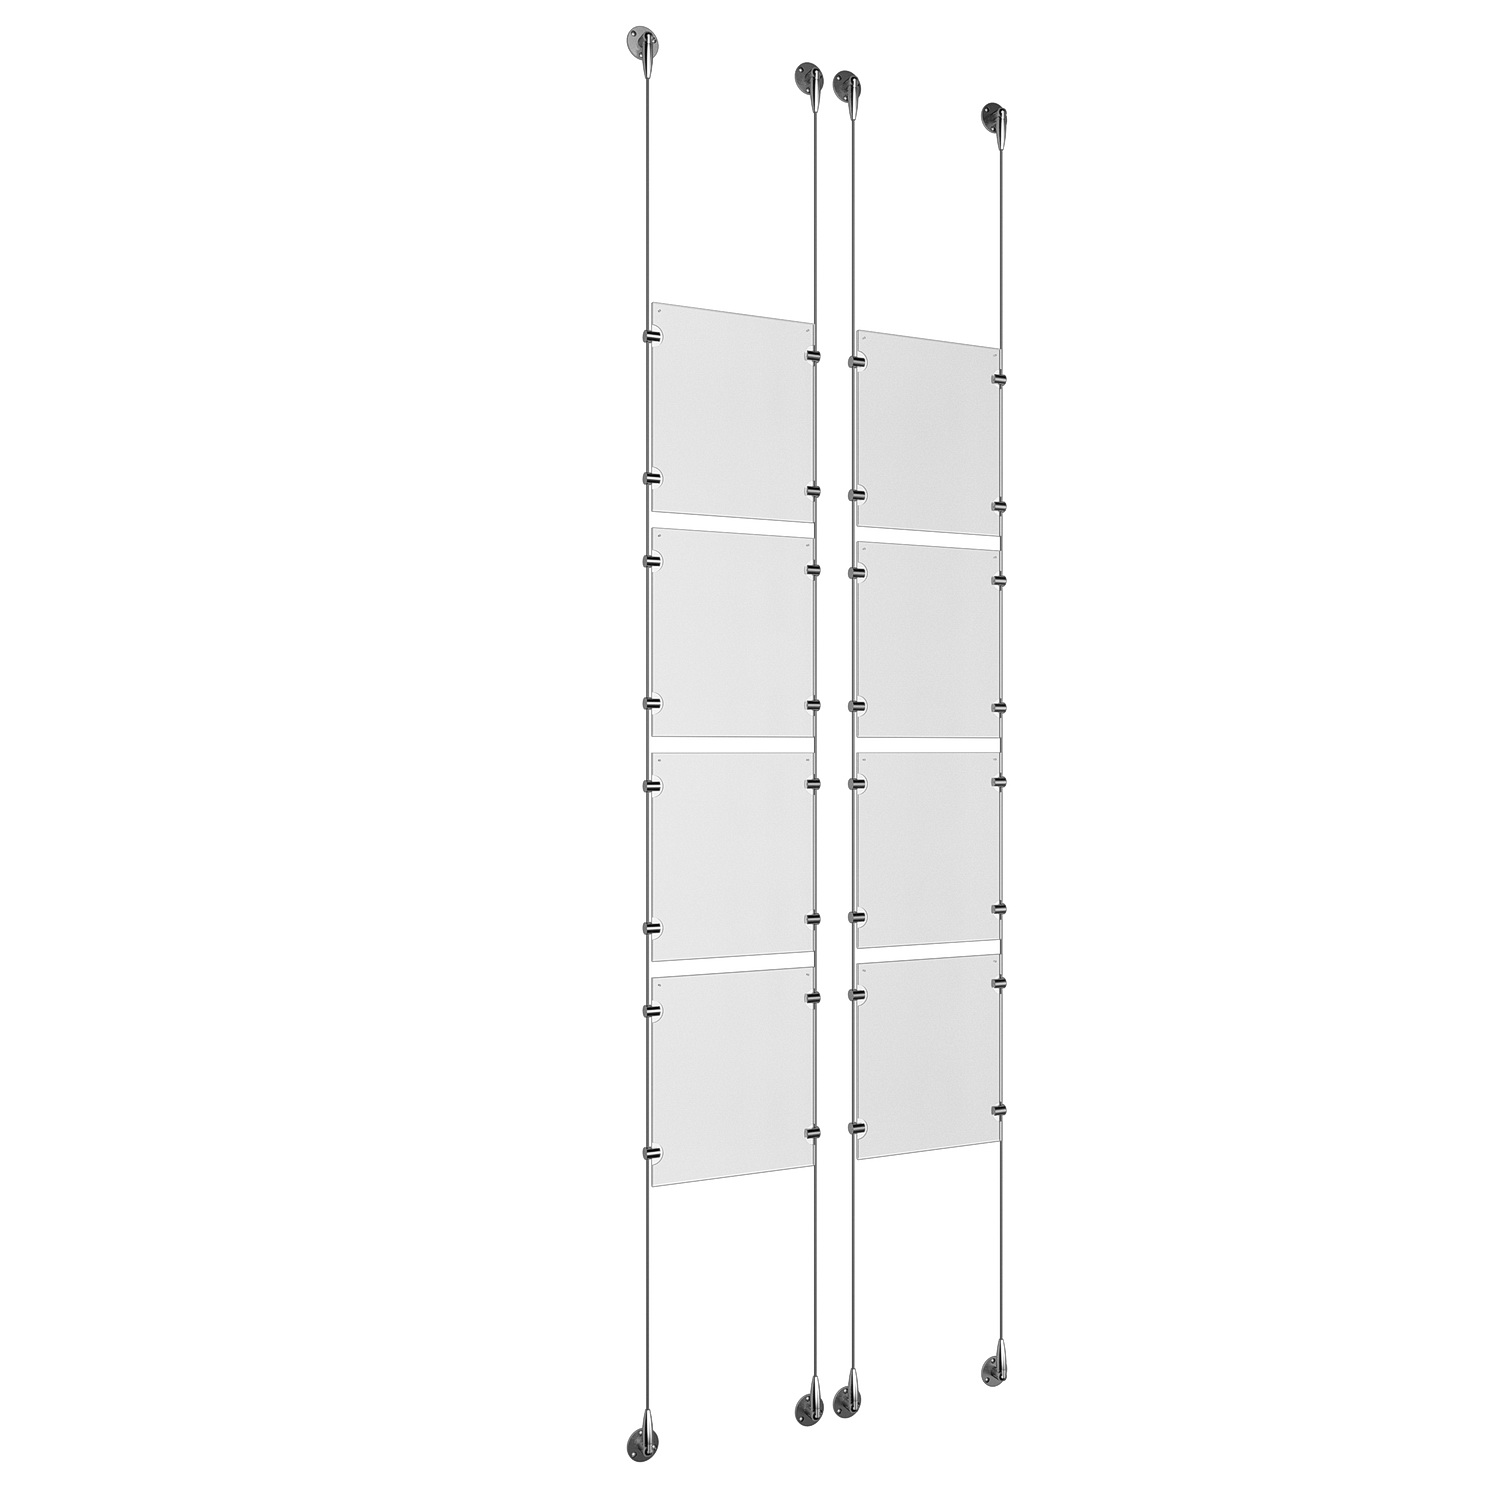 (8) 8-1/2'' Width x 11'' Height Clear Acrylic Frame & (4) Aluminum Clear Anodized Adjustable Angle Signature 1/8'' Diameter Cable Systems with (32) Single-Sided Panel Grippers